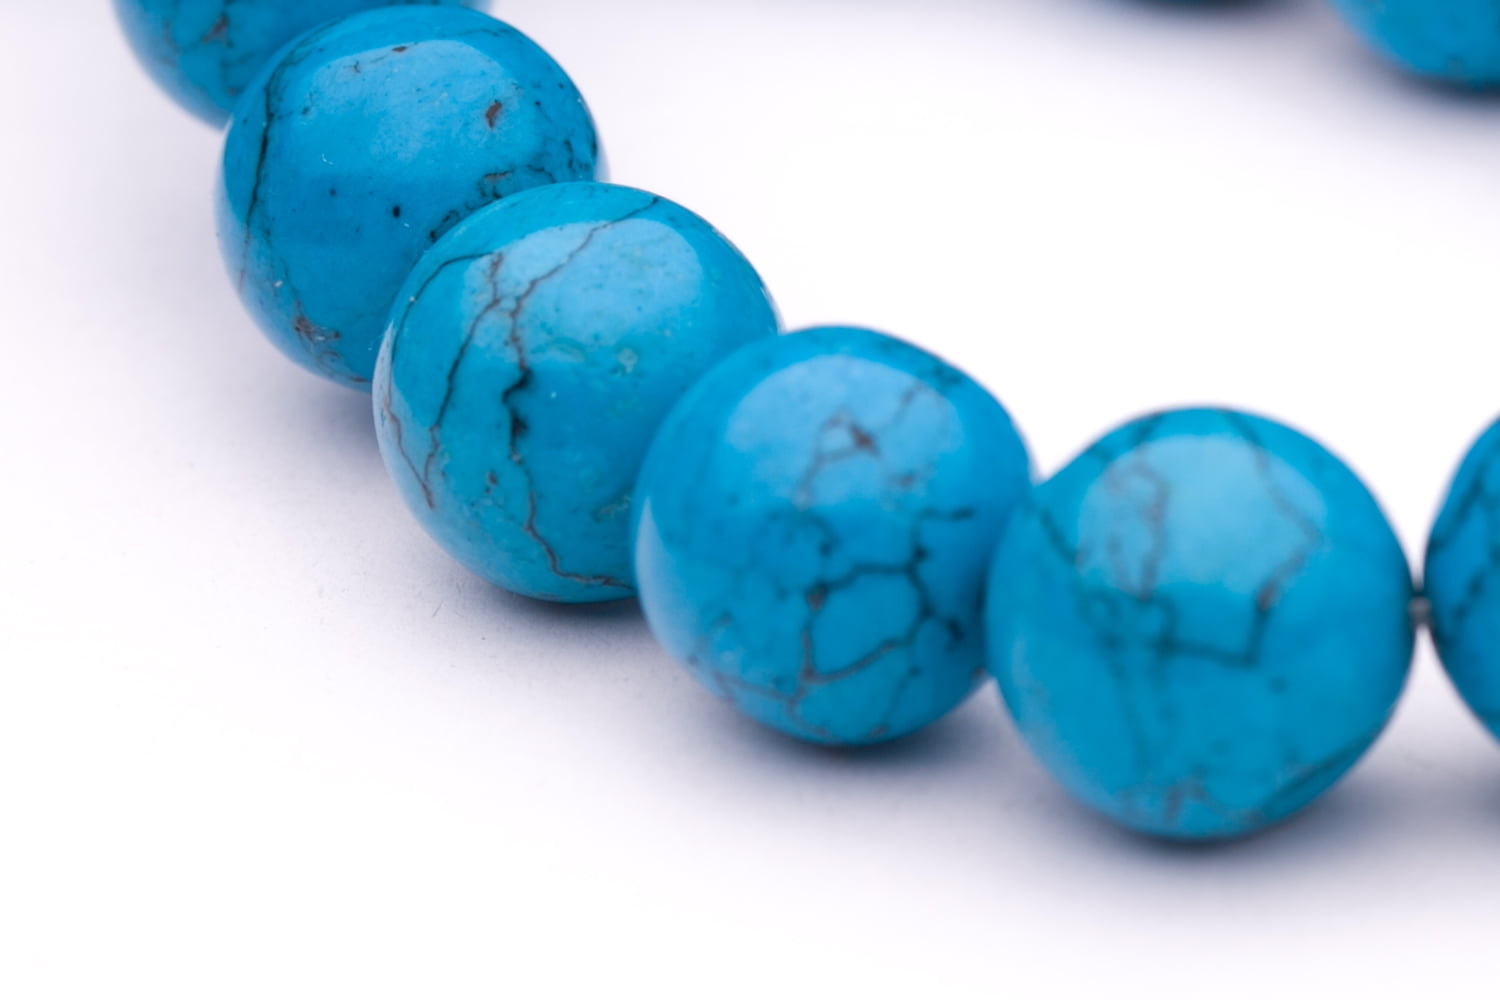 Mix Colored Howlite Turquoise Gemstone Round Beads 16'' 4mm 6mm 8mm 10mm 12mm 